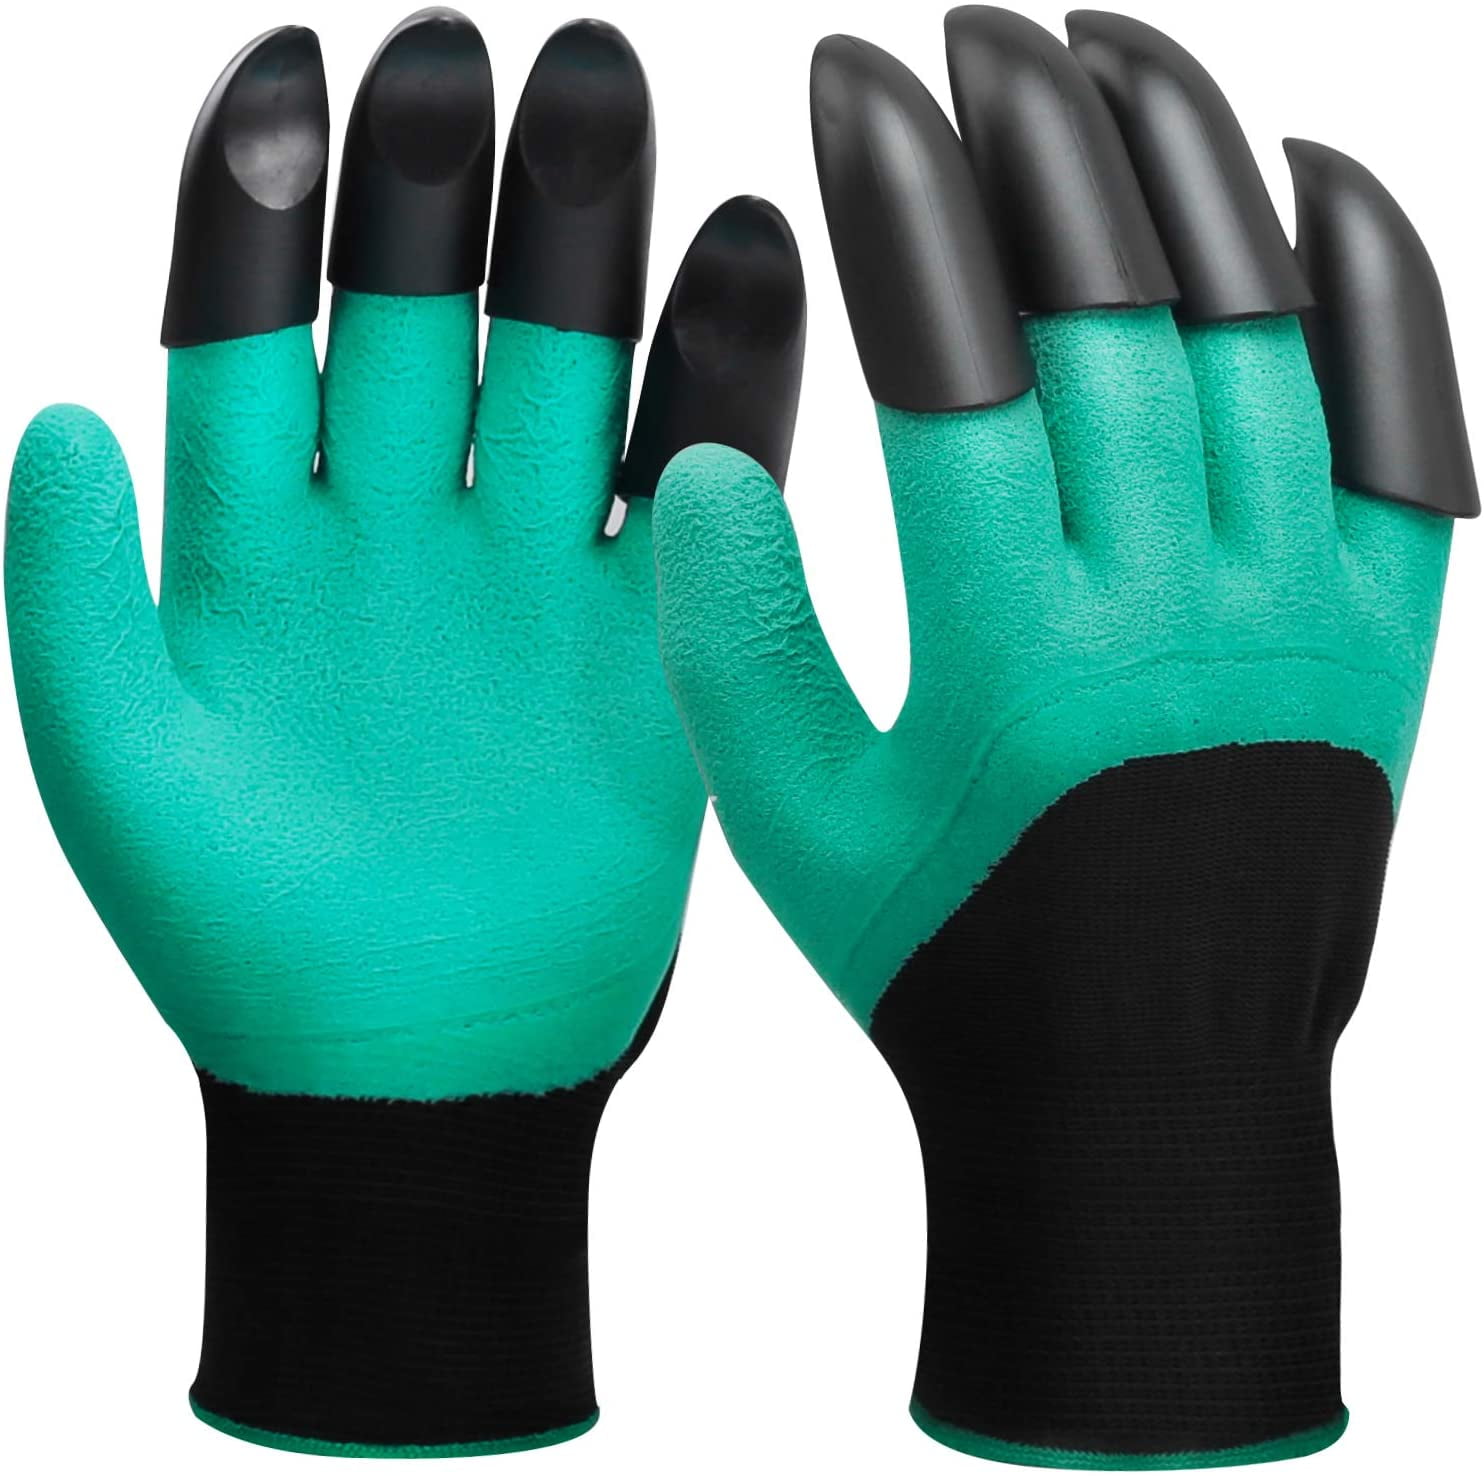 Gardening Gloves Water Resistant Size Small Best Quality Men/Women New 